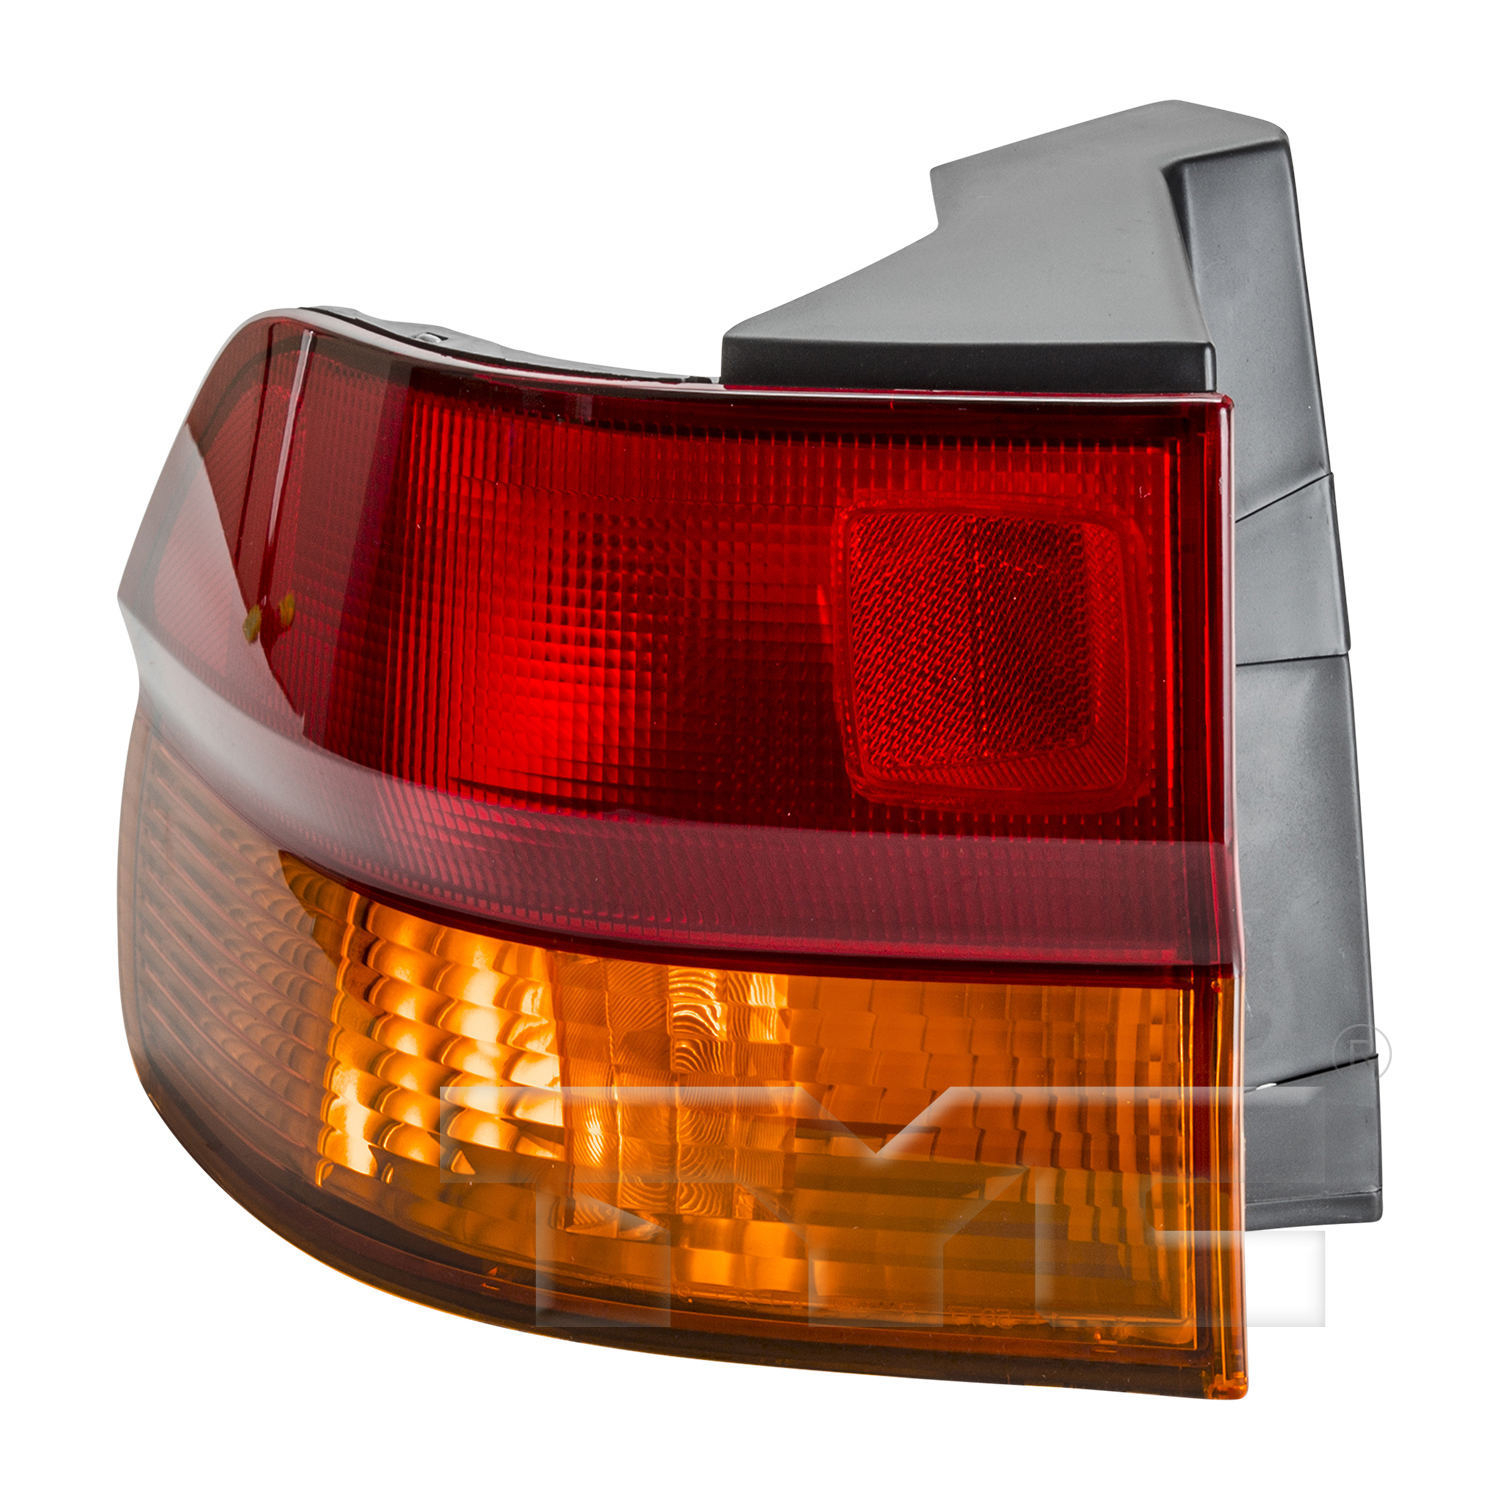 Aftermarket TAILLIGHTS for HONDA - ODYSSEY, ODYSSEY,02-04,LT Taillamp lens/housing